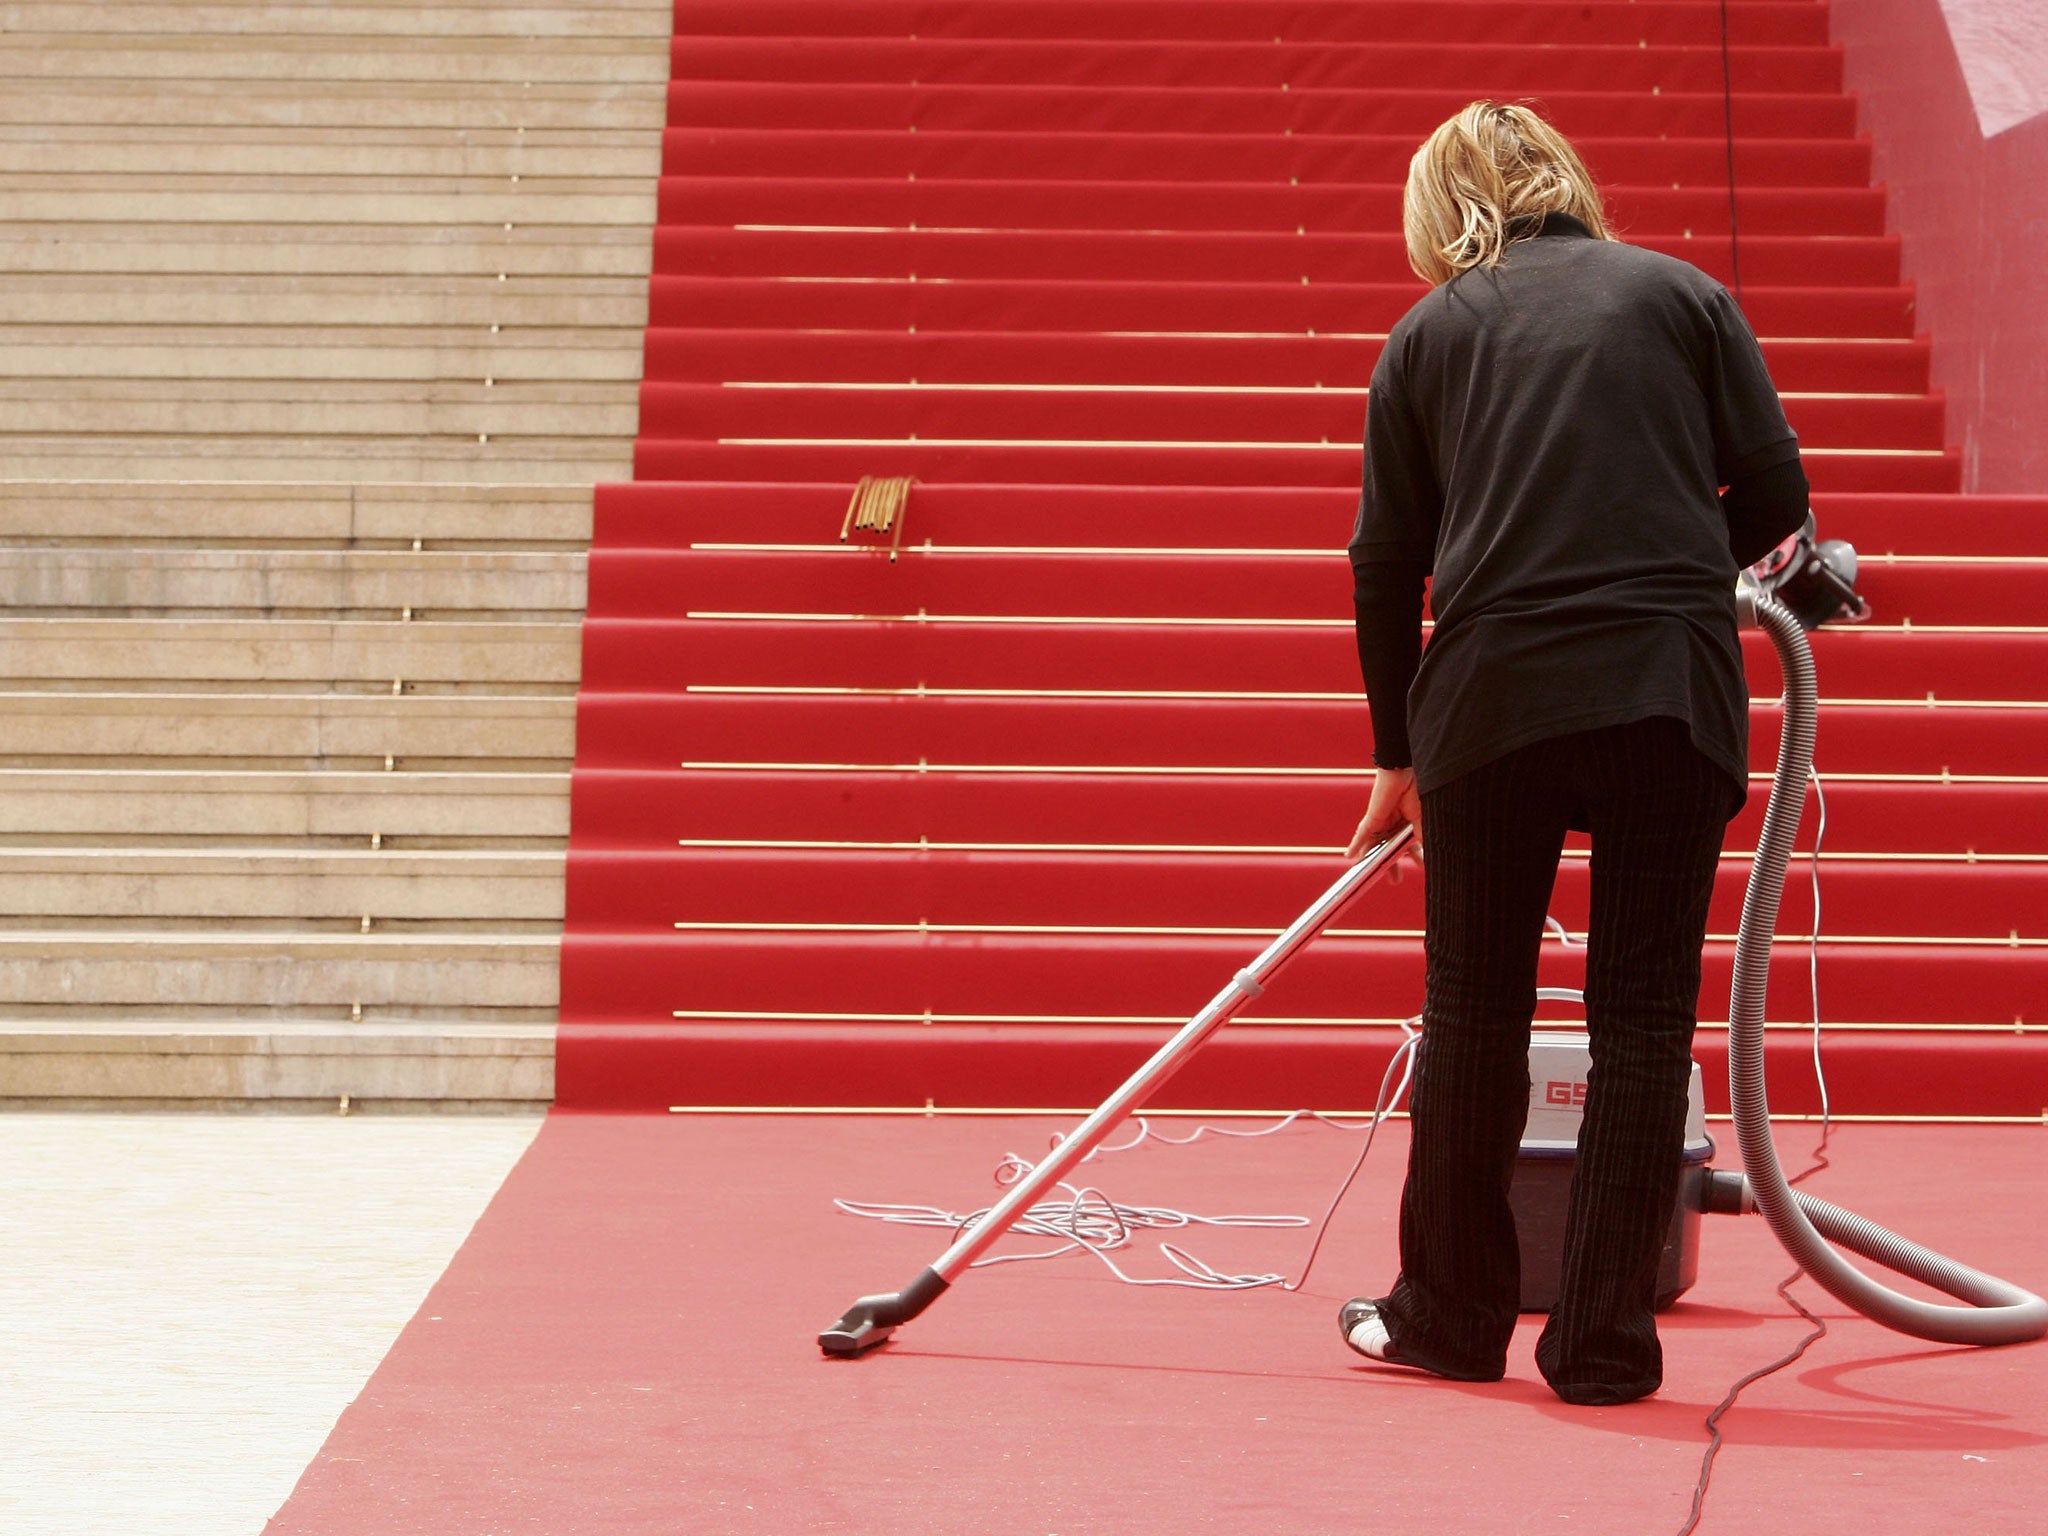 A cleaner prepares the red carpet for the opening night during the 59th International Cannes Film Festival May 17, 2006 in Cannes, France.